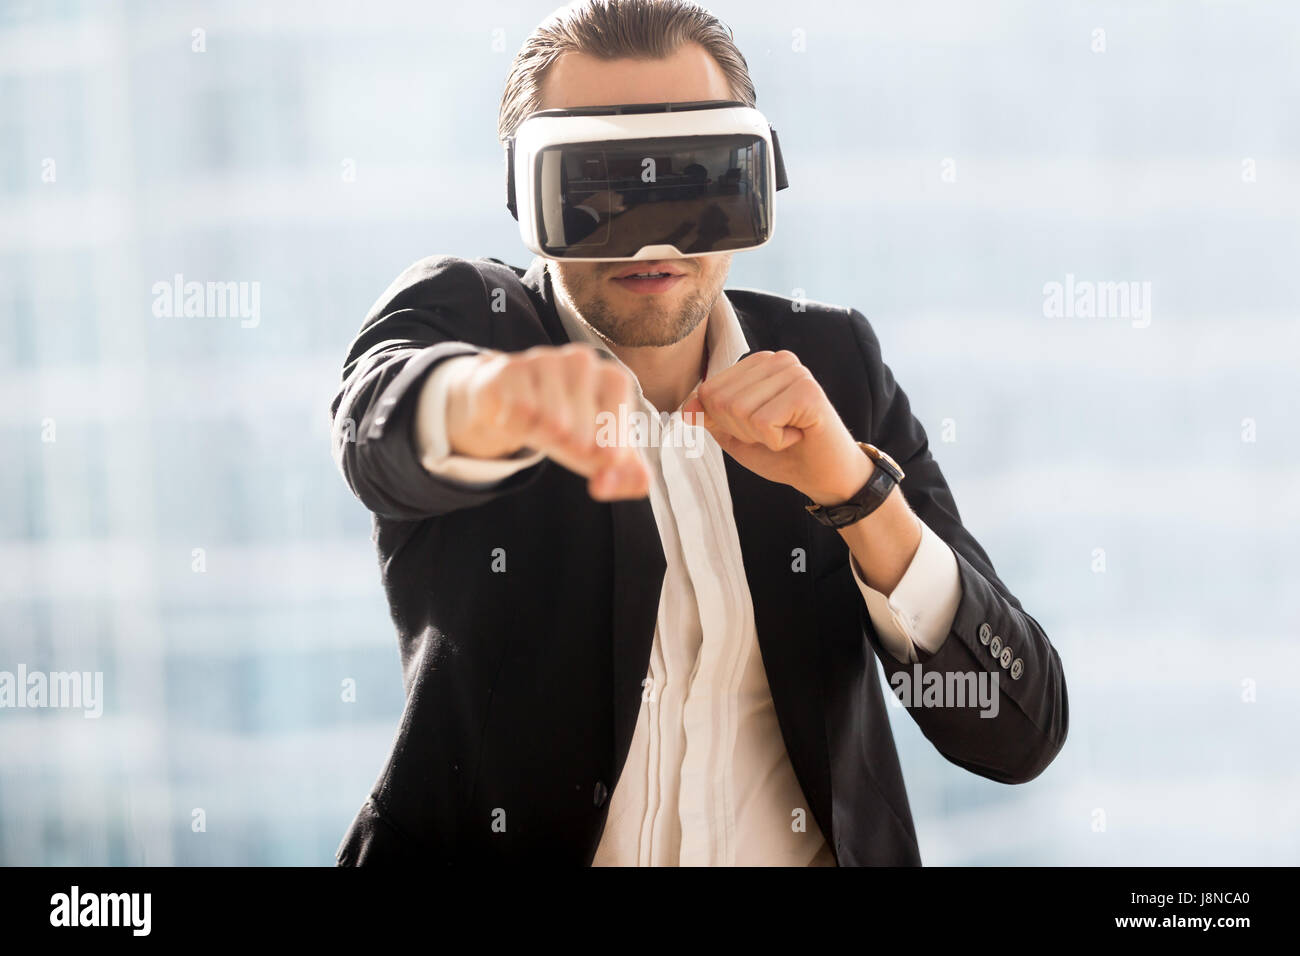 Man boxing with virtual reality glasses on head Stock Photo